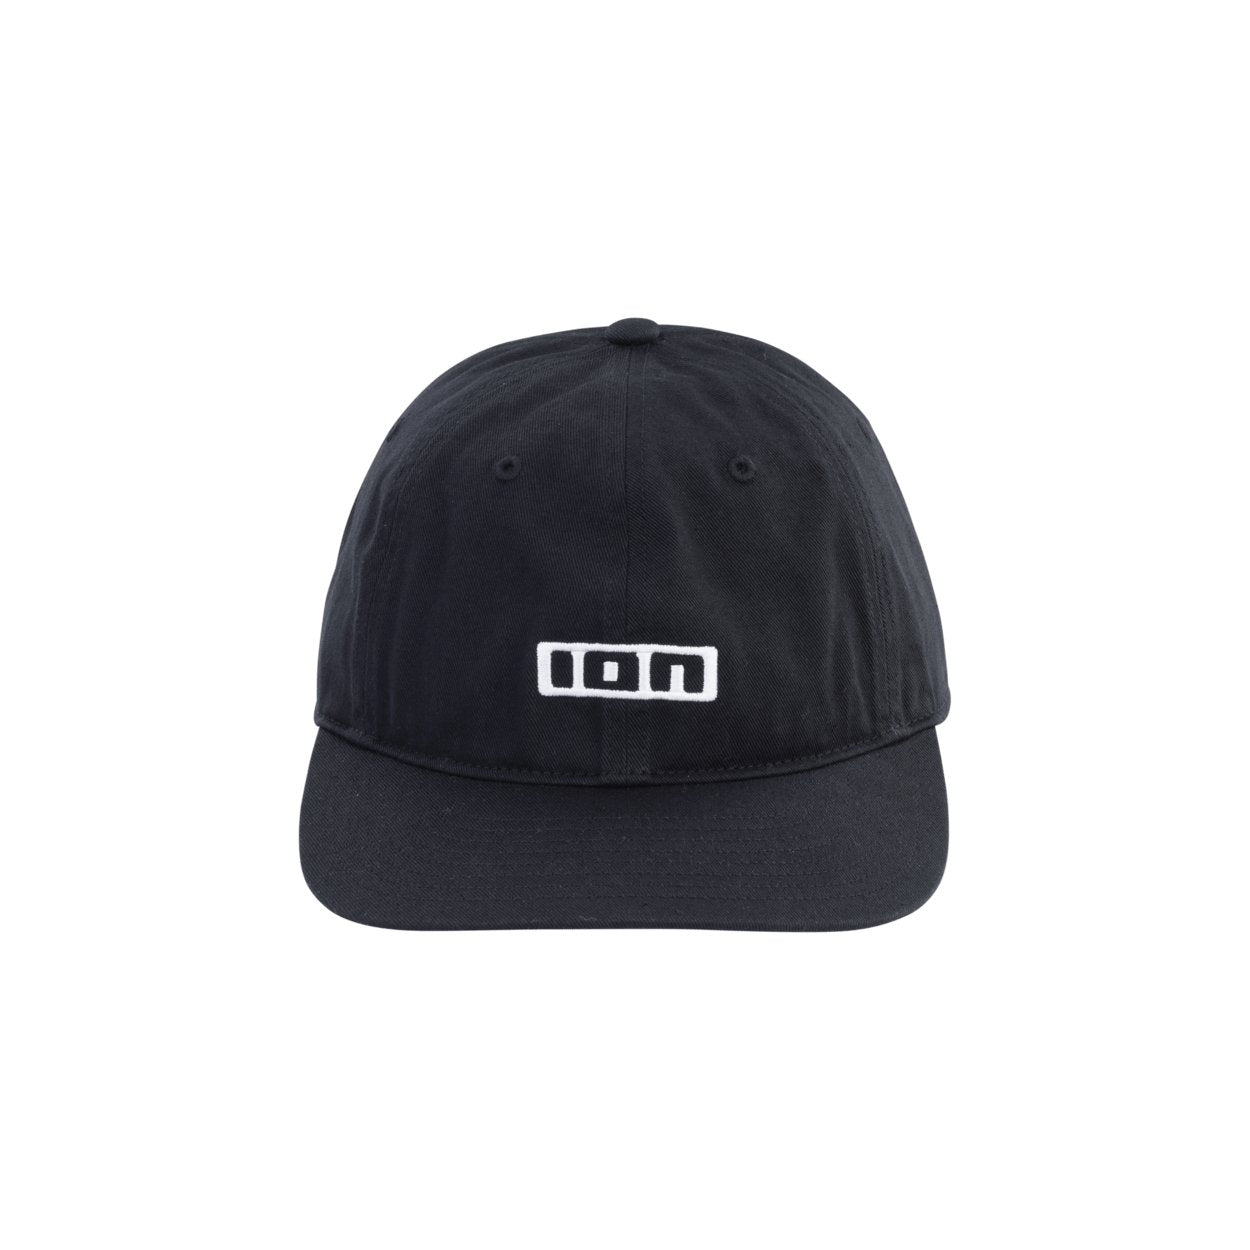 ION Cap Session 2025 - Worthing Watersports - 9010583208824 - Apparel - ION Bike